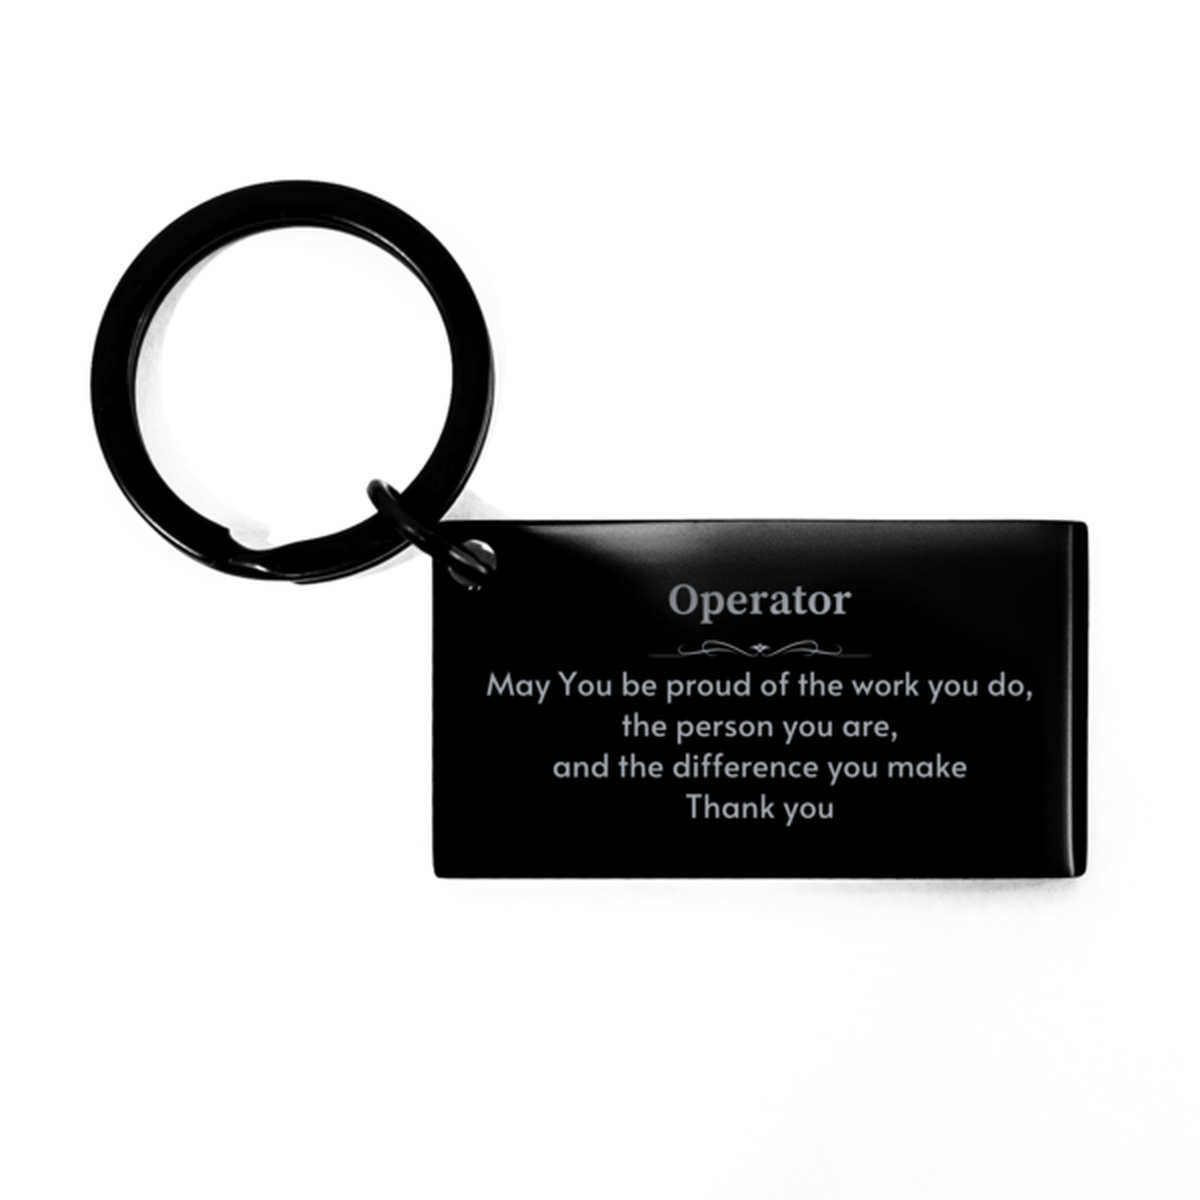 Heartwarming Keychain Retirement Coworkers Gifts for Operator, Police Officer May You be proud of the work you do, the person you are Gifts for Boss Men Women Friends